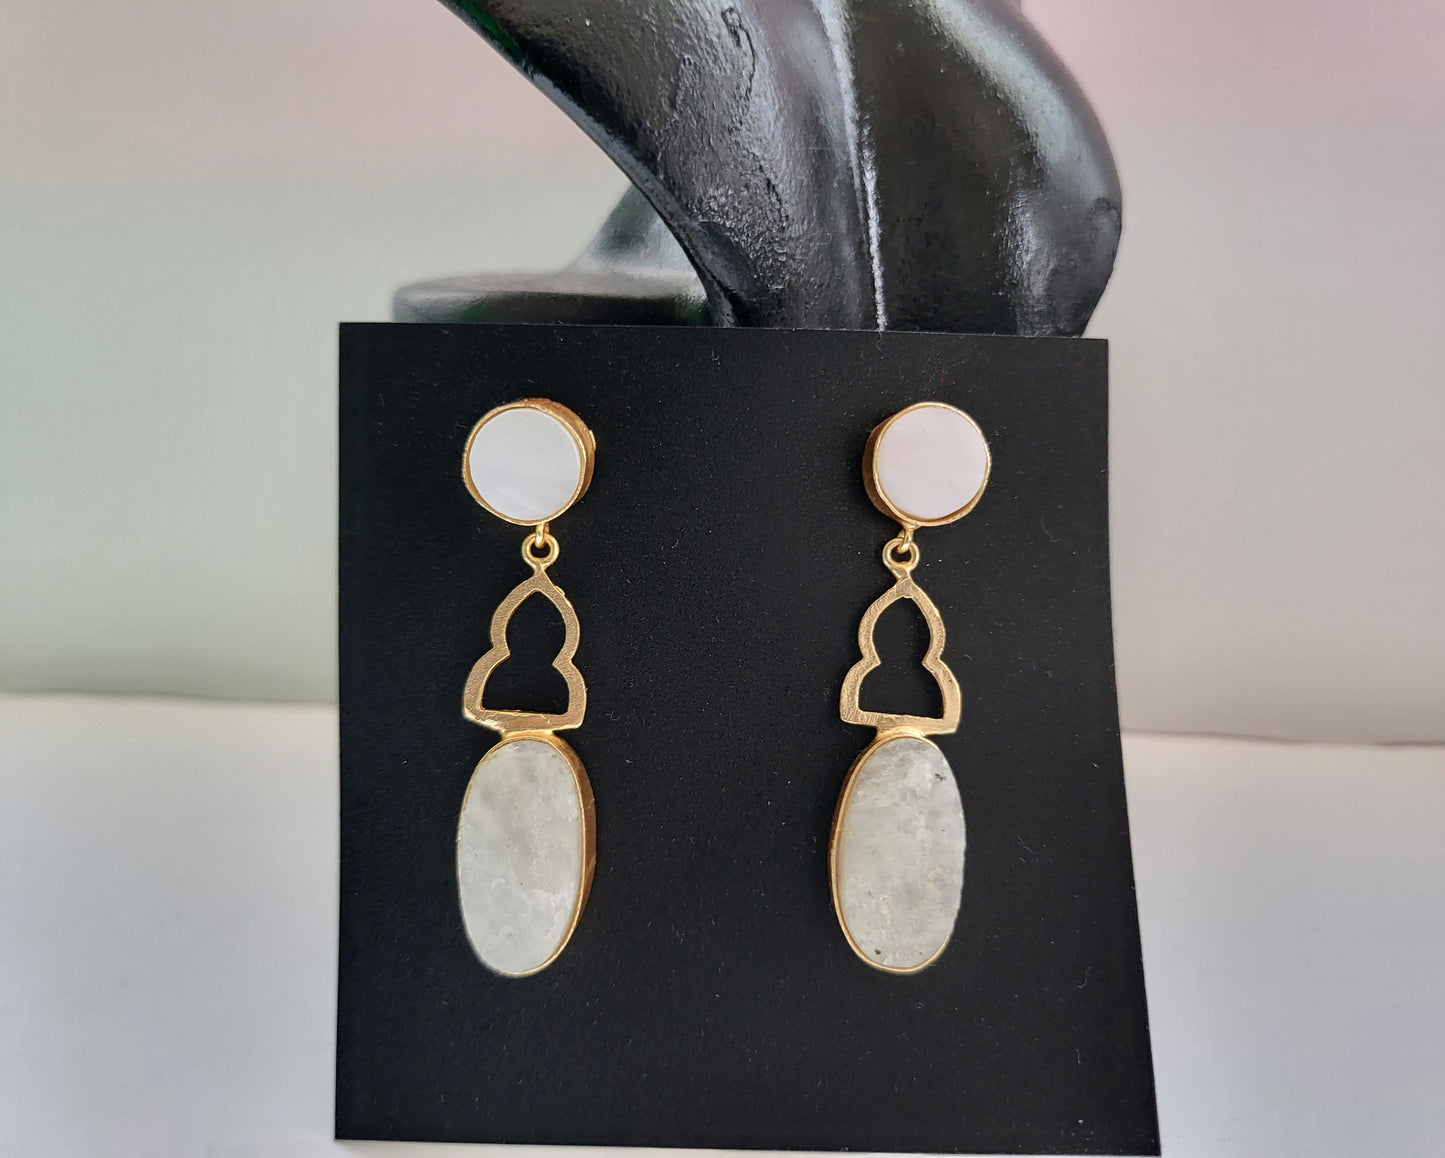 White Passion Earrings